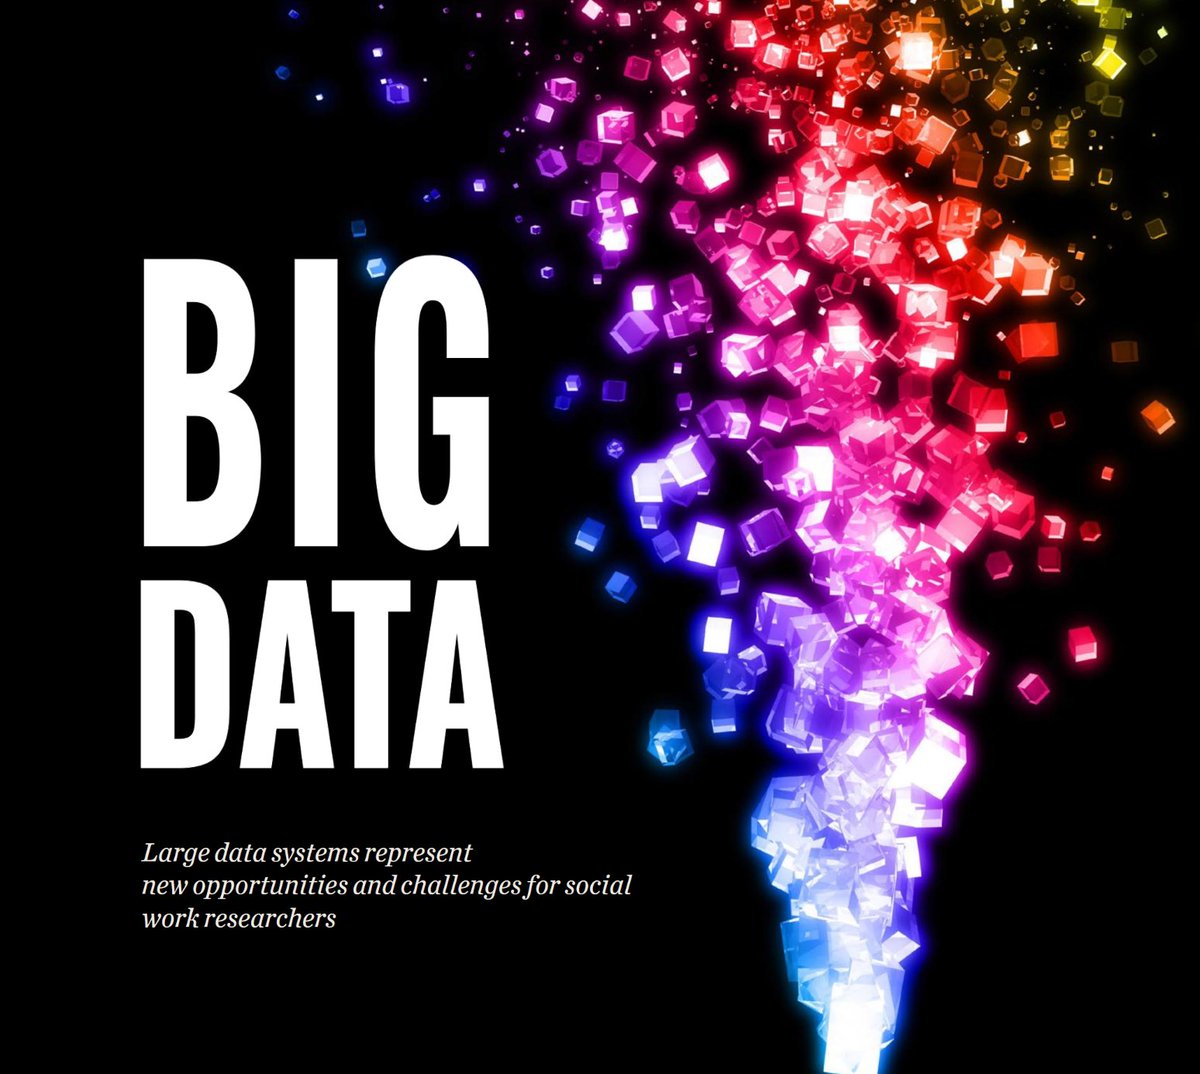 Big data is 'an exciting area that represents a new direction for social work research at UGA,' says Associate Dean for Research Orion Mowbray. Read about our faculty using big data in the latest edition of Innovate, which is available free online: issuu.com/ugasocialwork/…